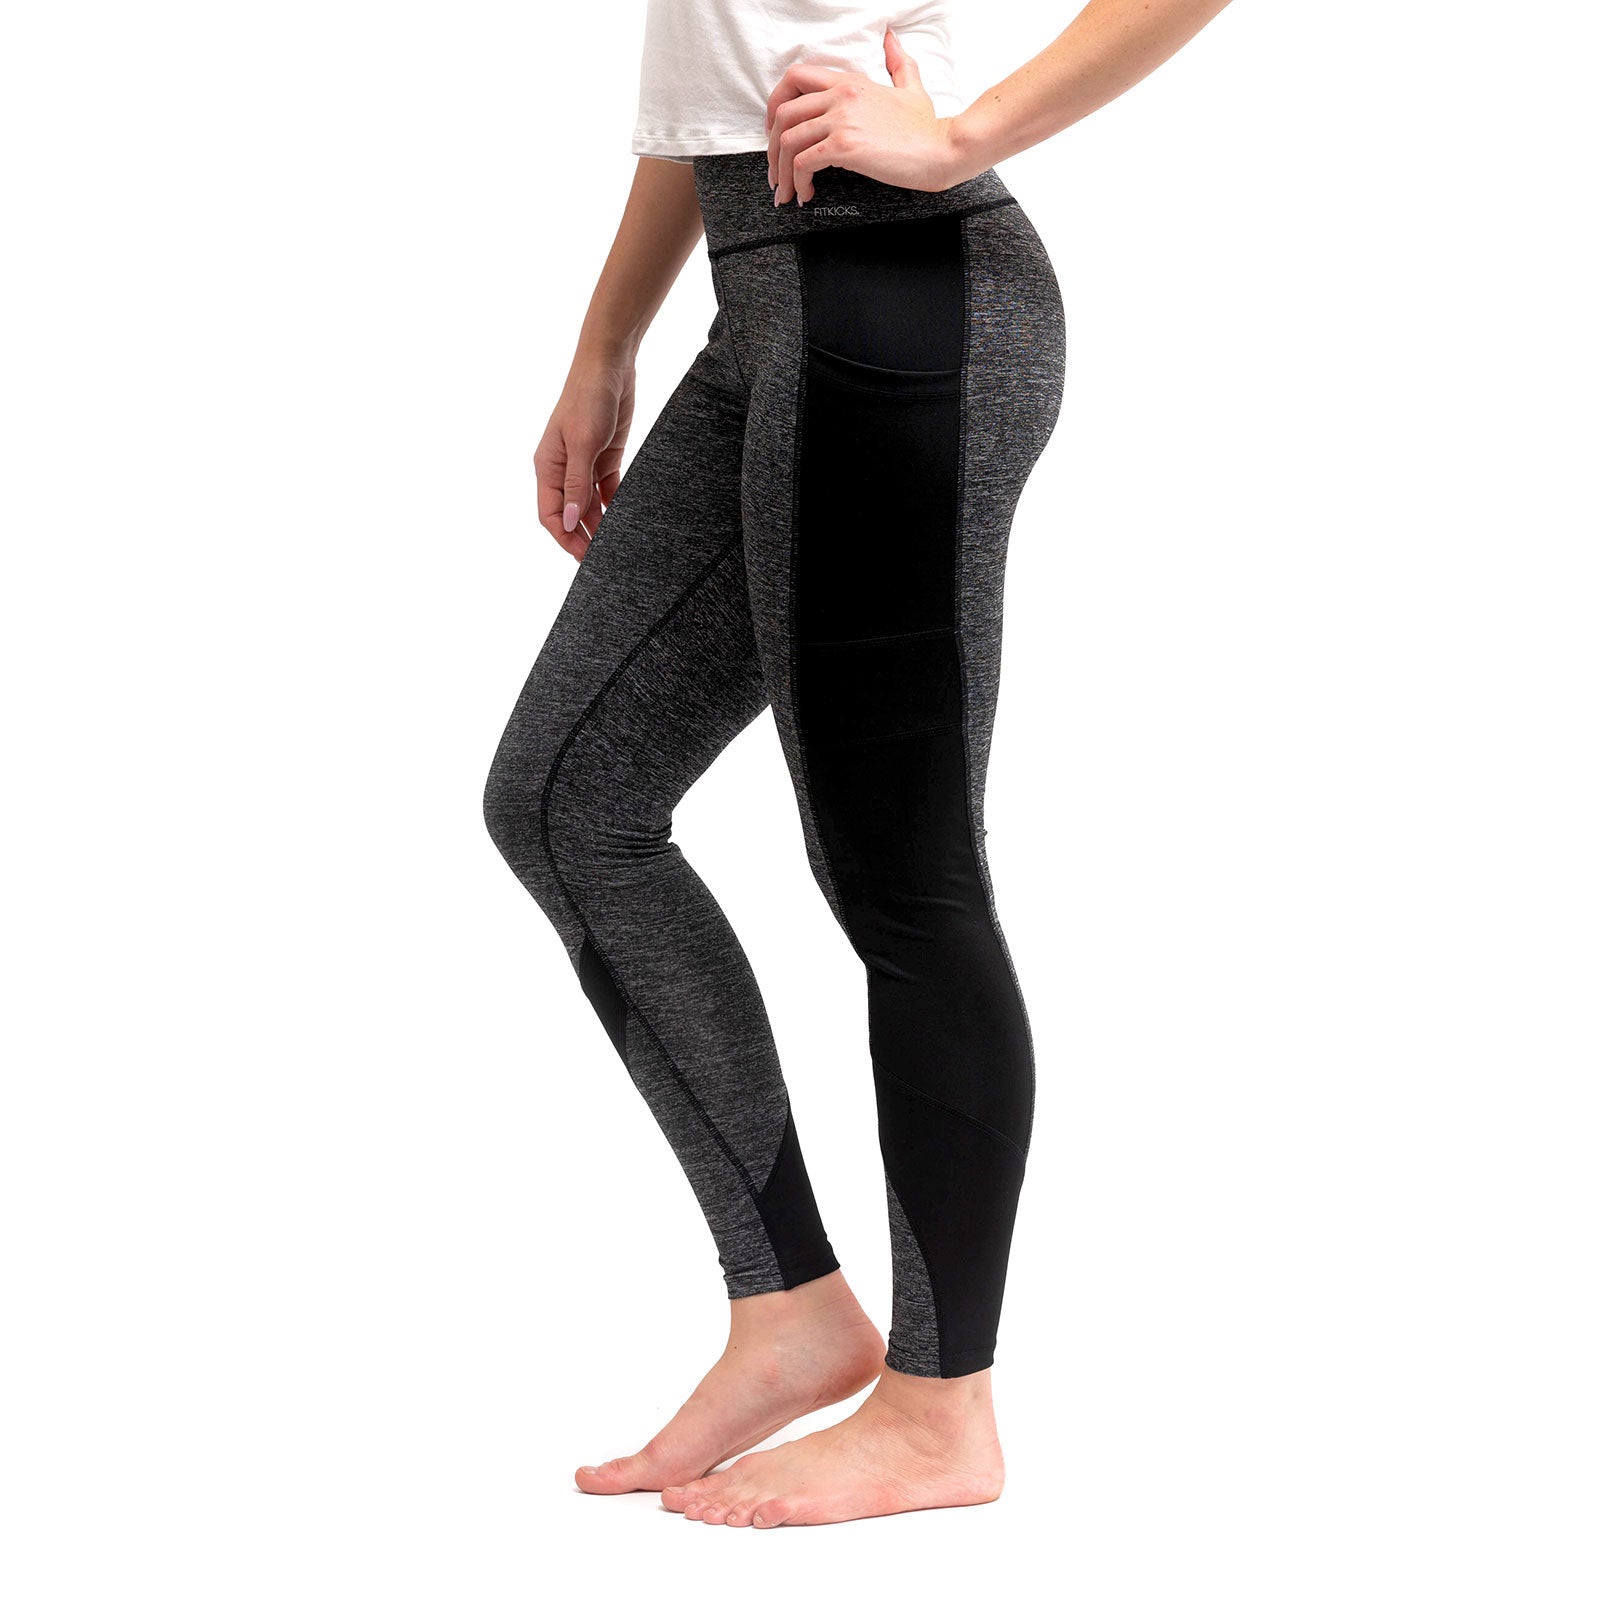 FITKICKS Crossover Legging Colorblocked Collection - Thai-Me Spa